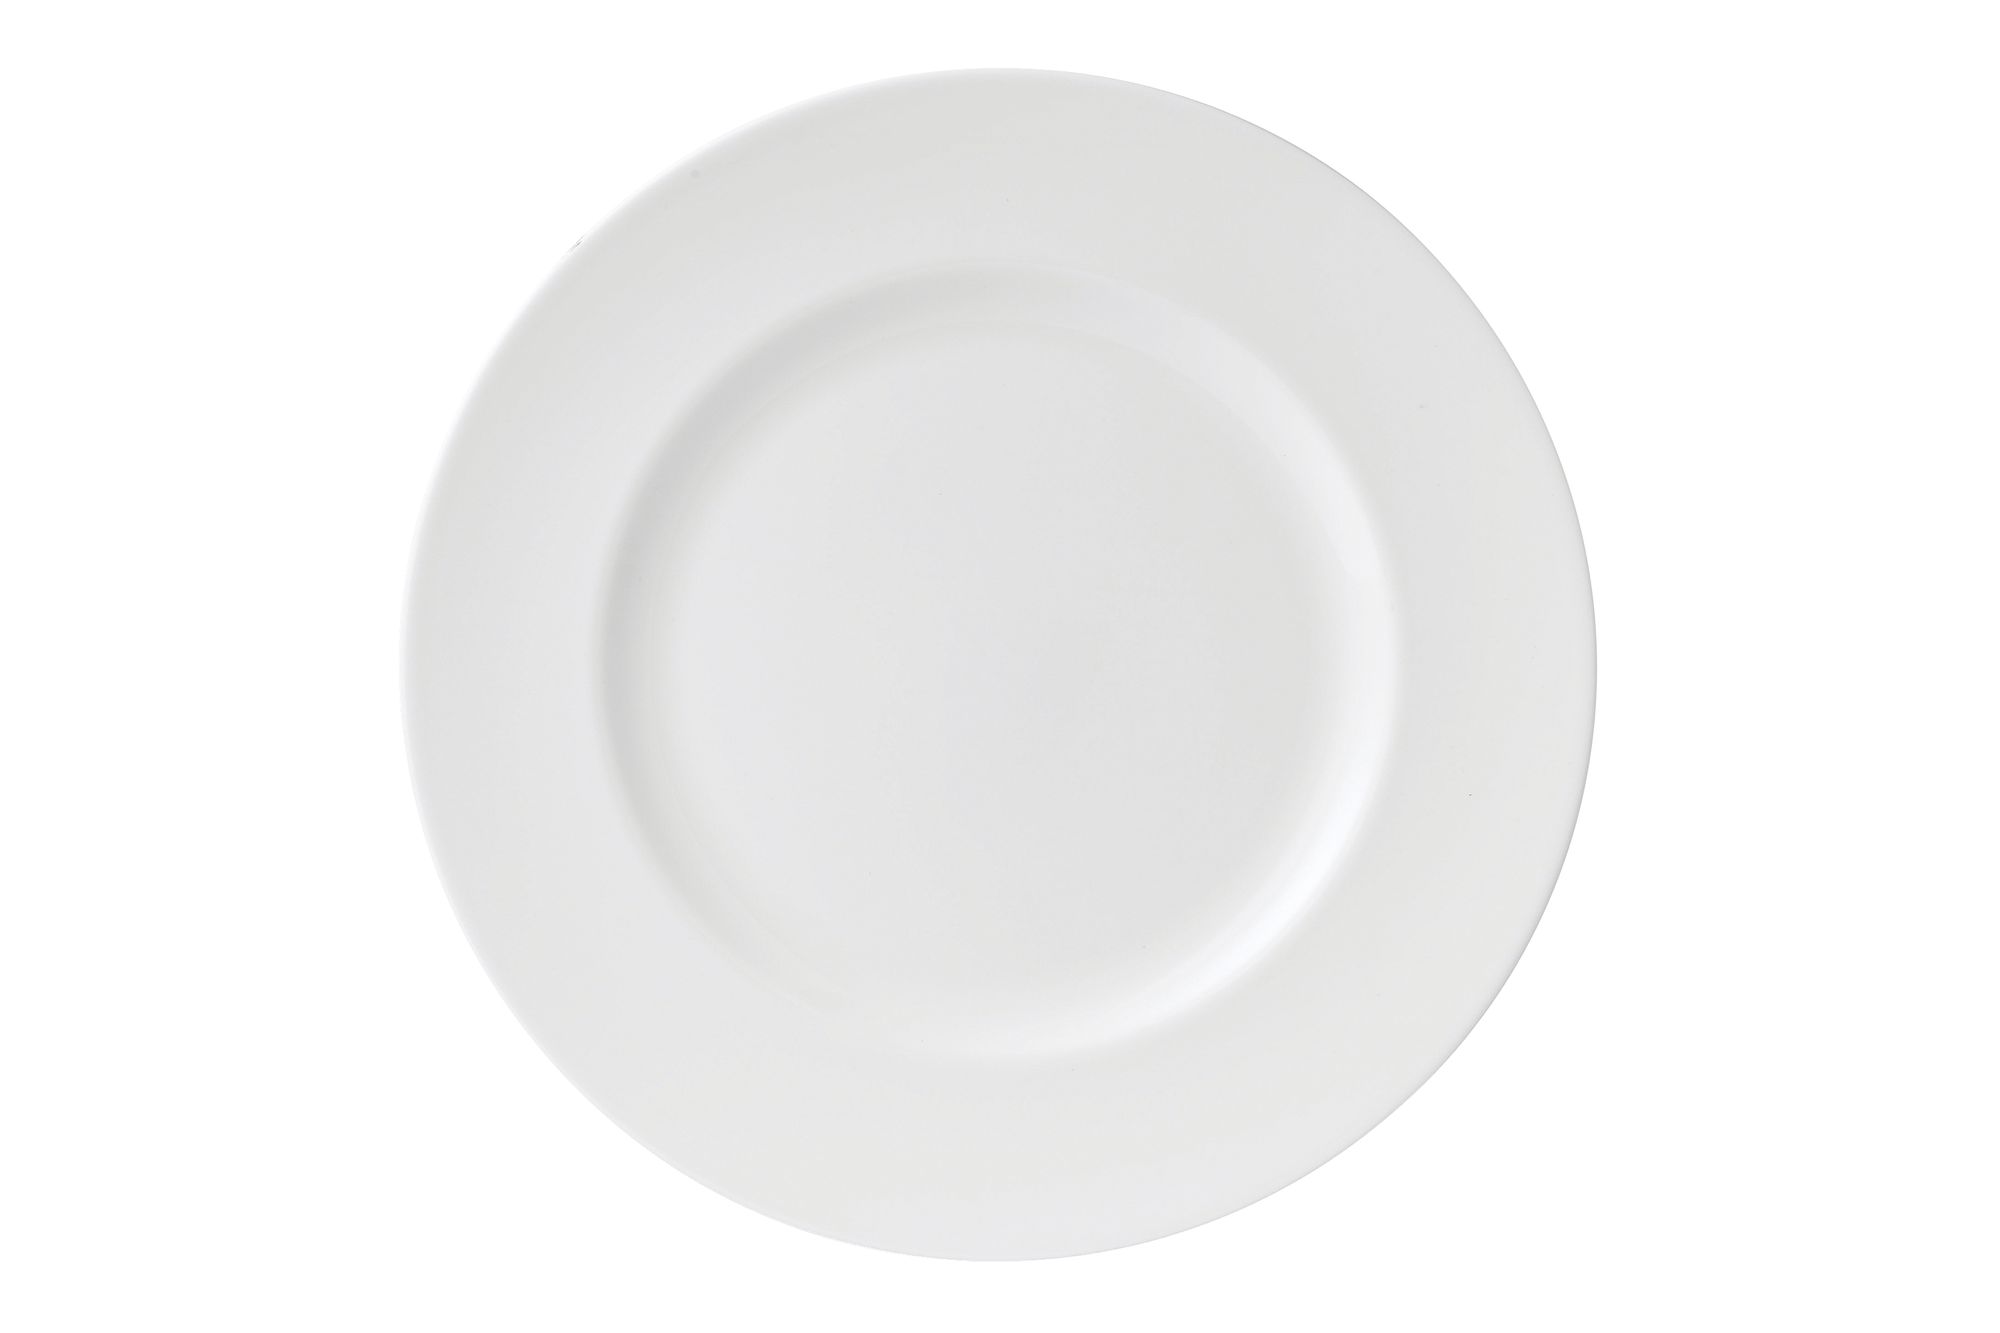 Wedgwood Wedgwood White Dinner Plate | In stock at £16.80 | Chinasearch